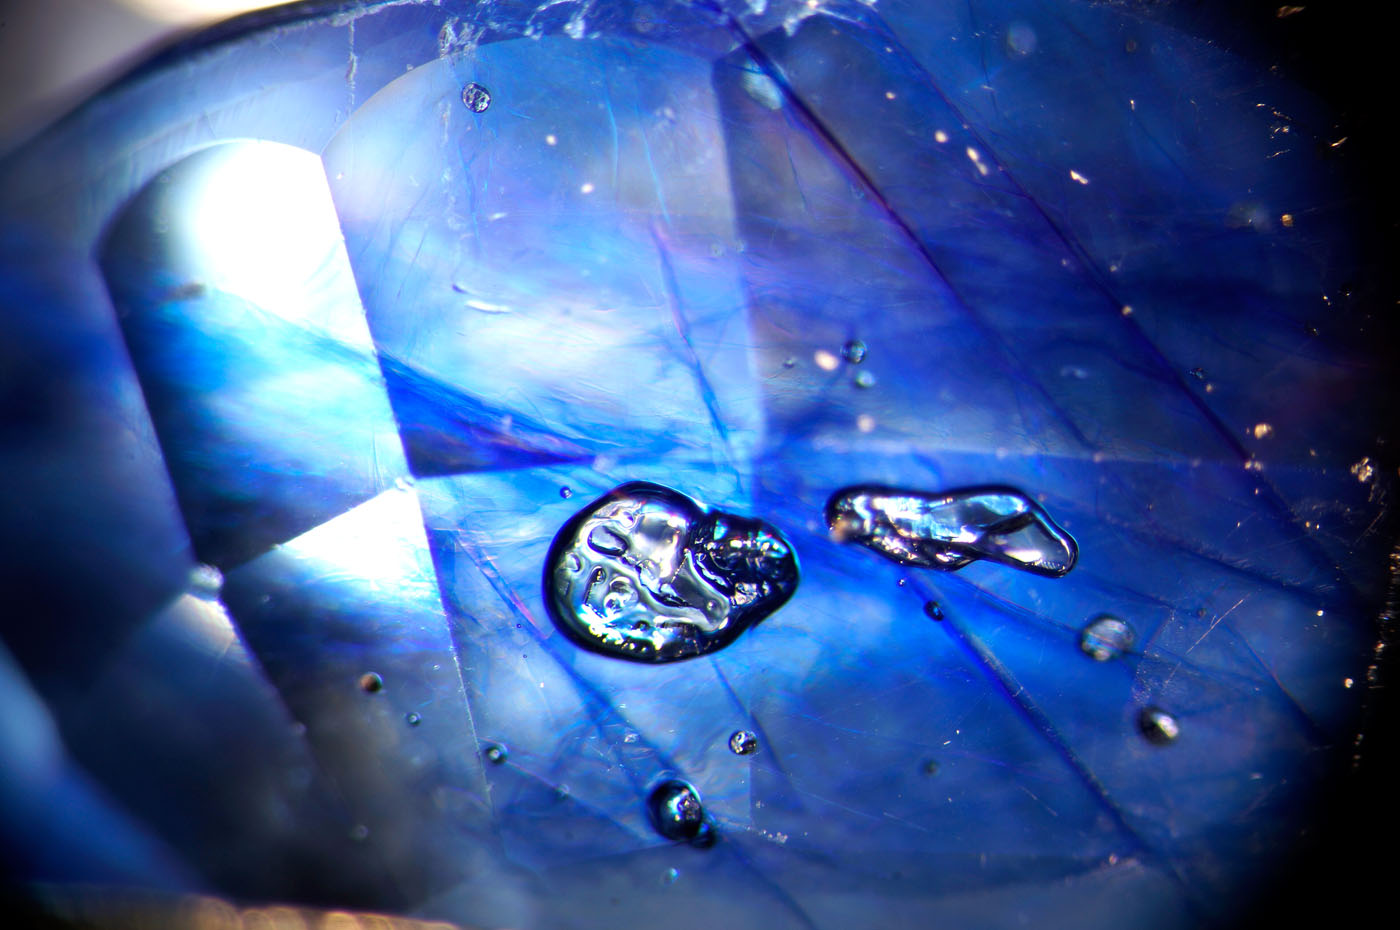 Figure 8. Flattened gas bubbles stand out in high relief in the glass filler of this cobalt-glass filled sapphire. Oblique fiber-optic illumination. (Photo: Wimon Manorotkul, Lotus Gemology).